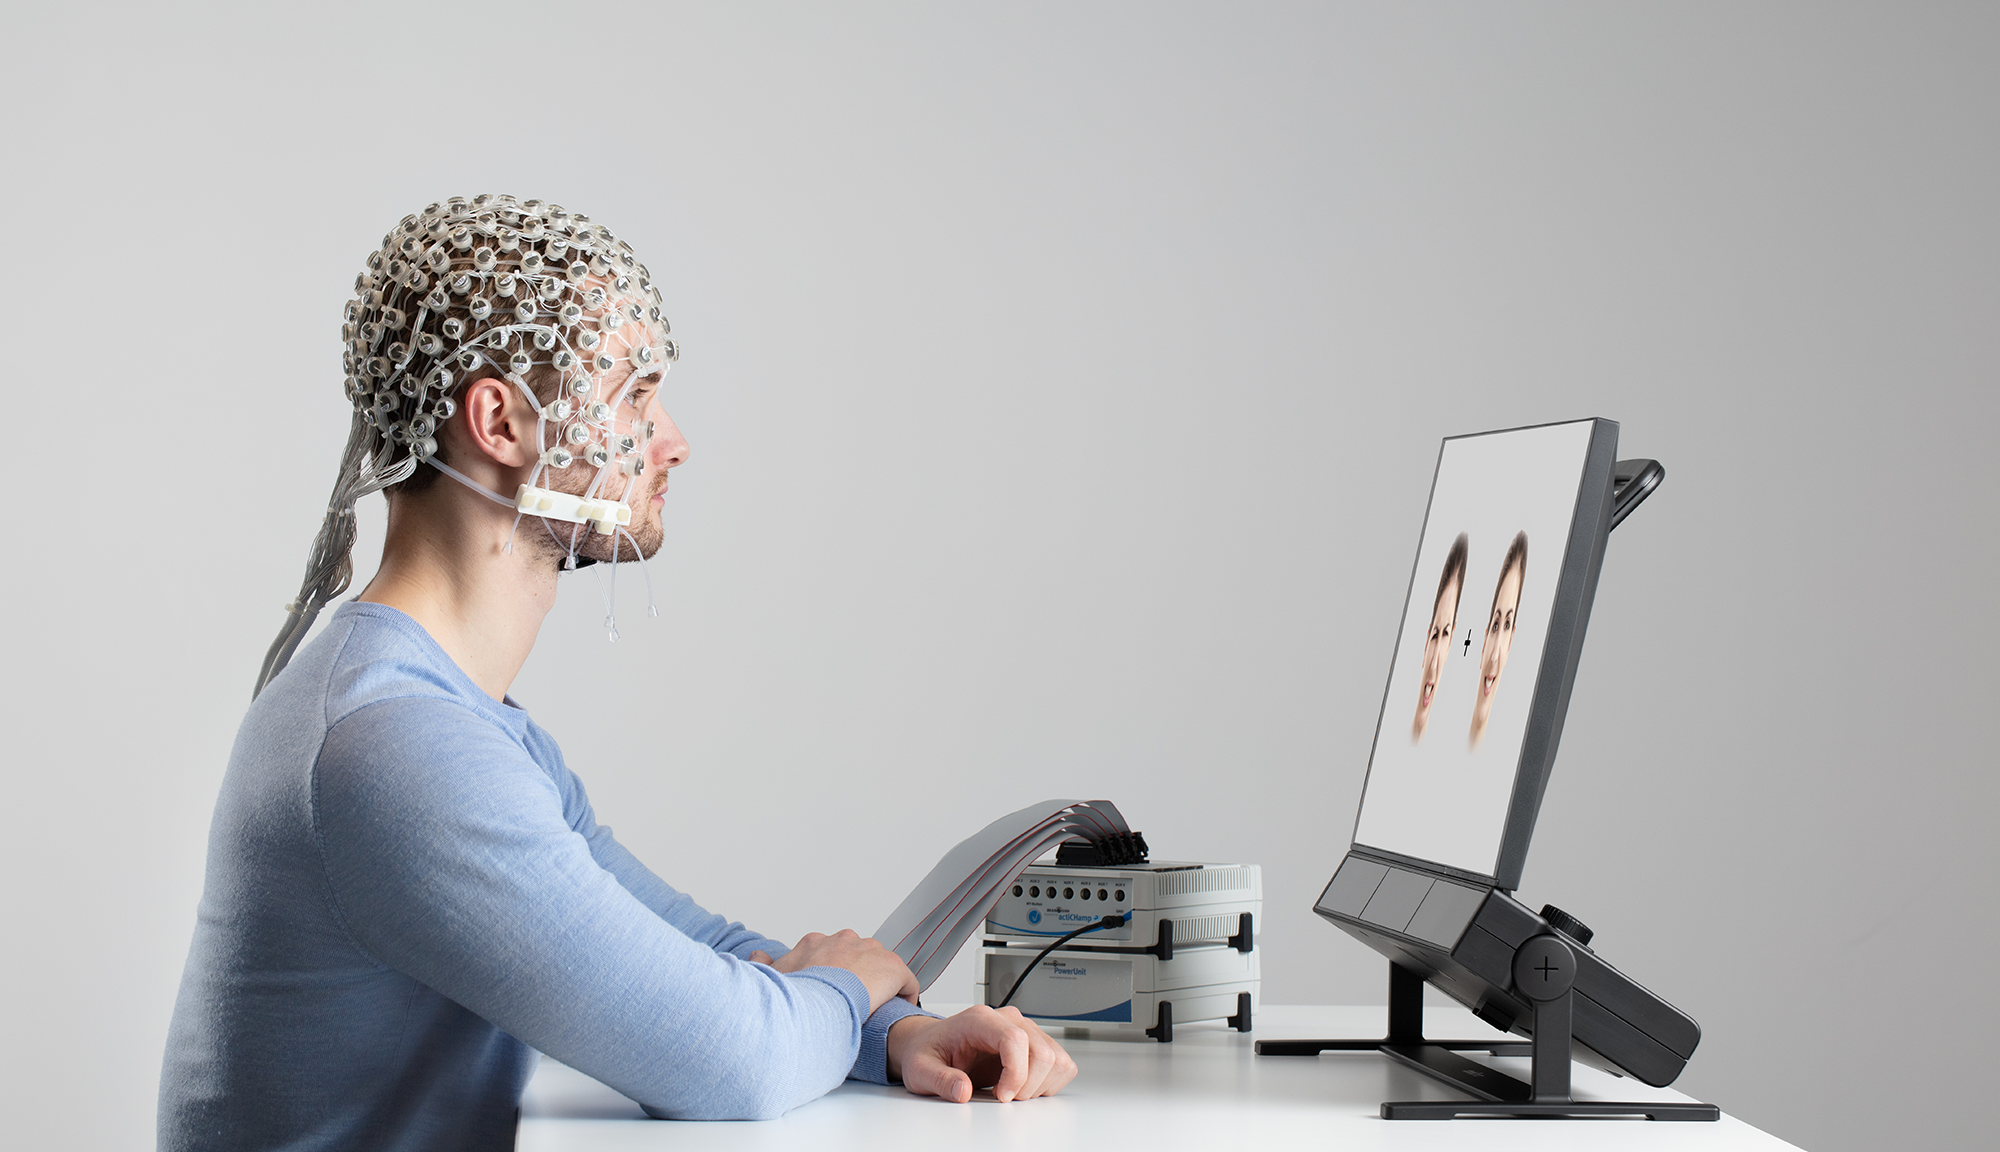 Tobii Pro Spectrum and EEG products